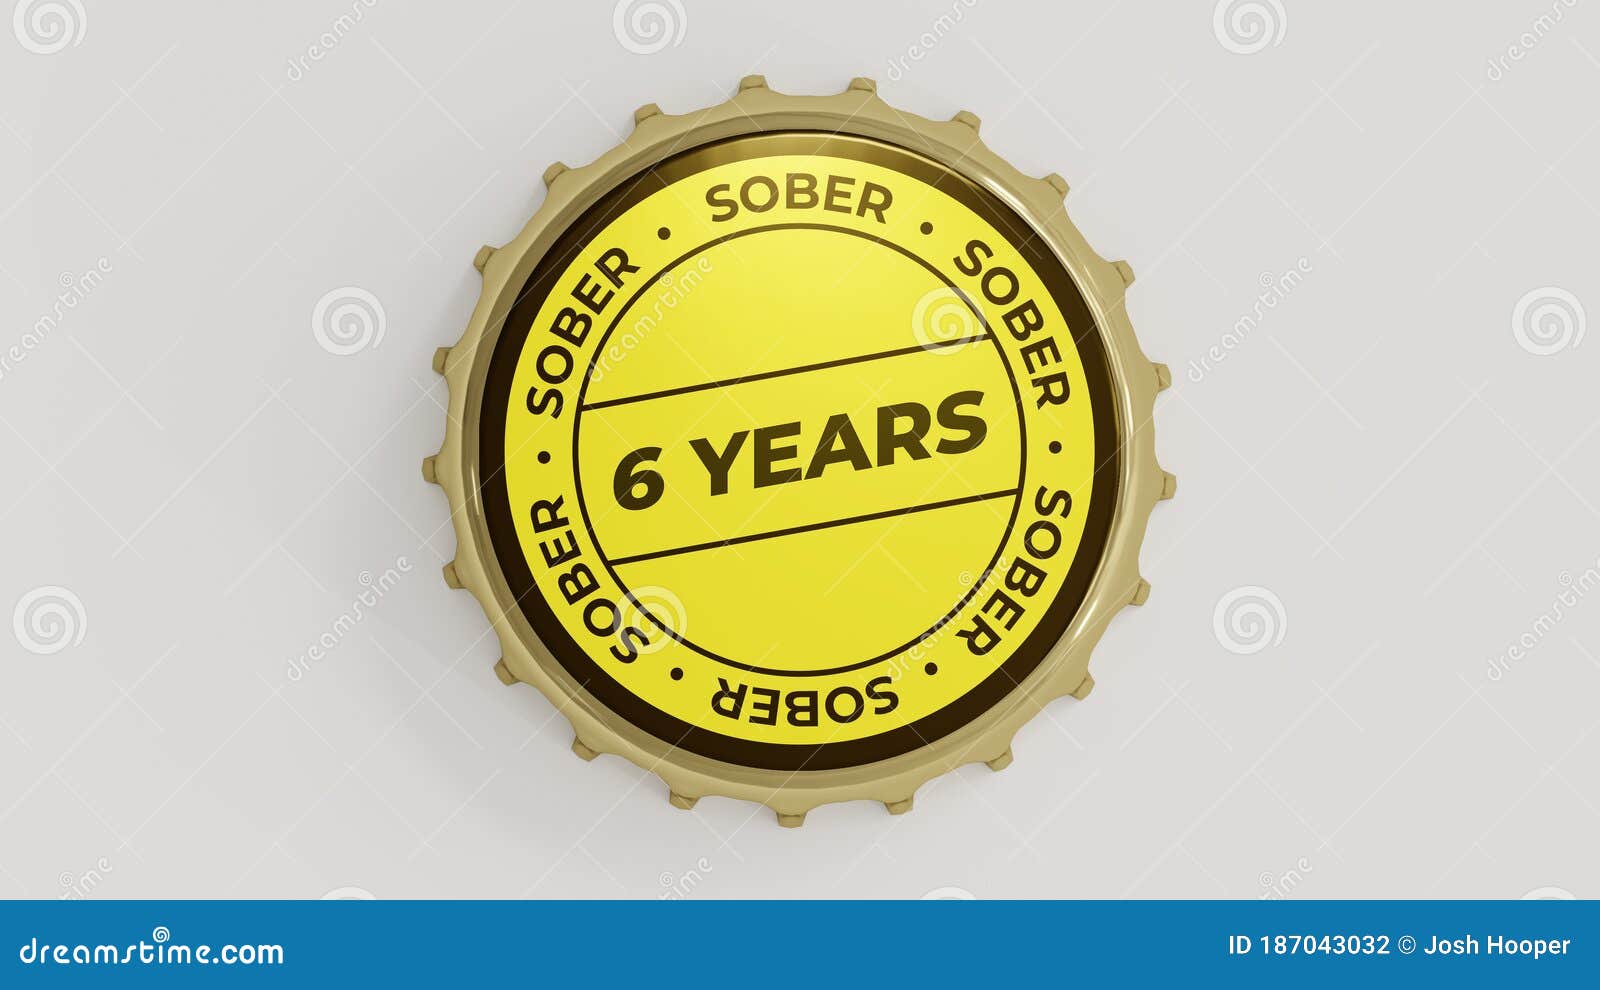 6 years sober. sobriety seal on a bottle cap